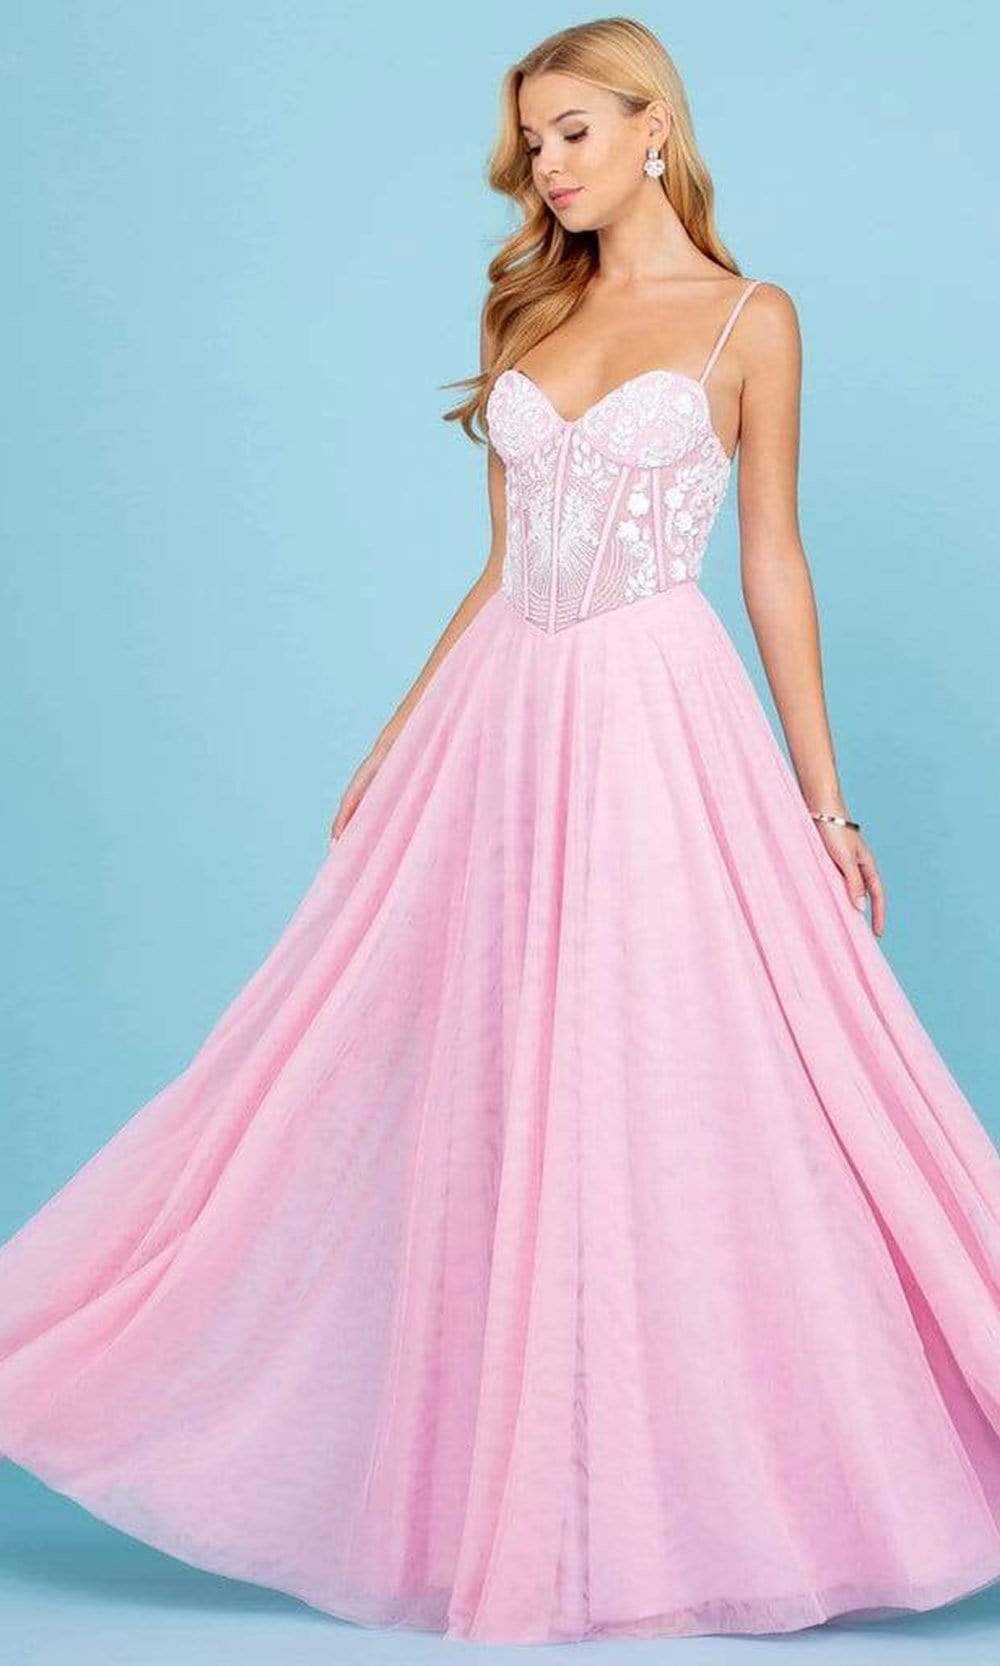 SCALA, SCALA - 60293 Beaded Sweetheart A-Line Gown